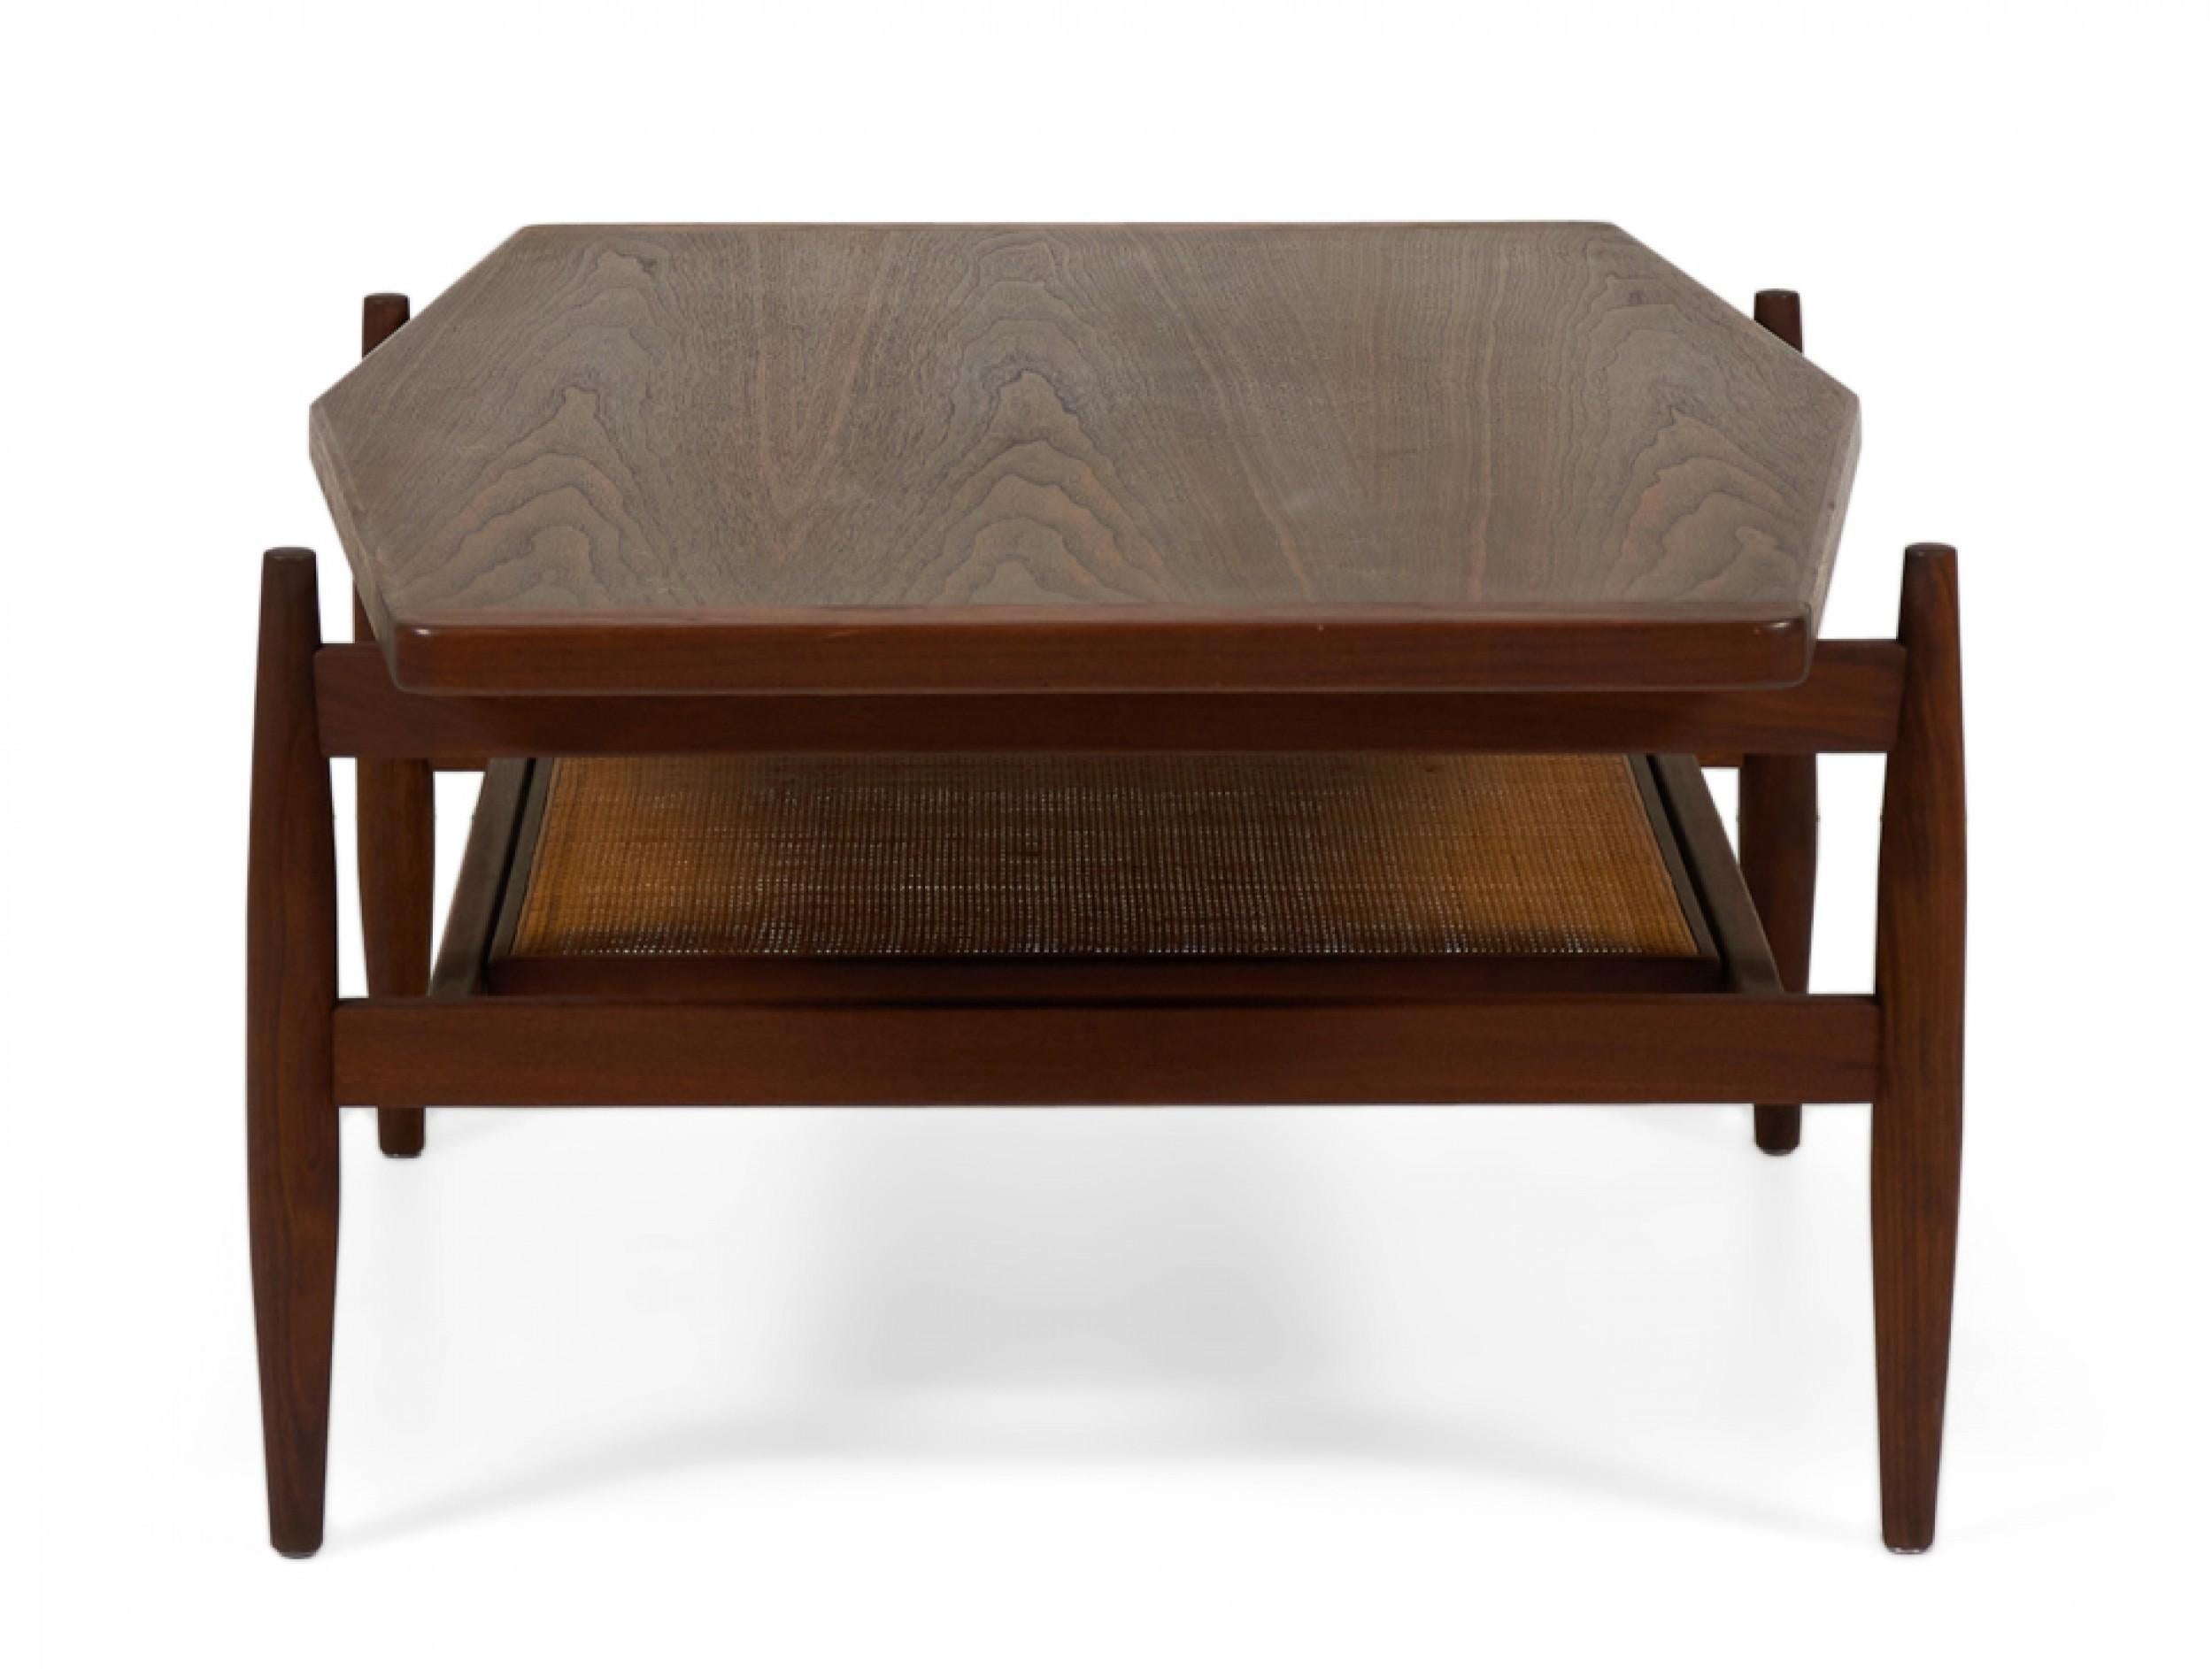 American/Danish Mid-Century walnut coffee table with a gently diamond-shaped top resting on a structured stretcher base with four tapered legs and stretcher shelf with caned inset. (JENS RISOM)(Similar tables: DUF0091A, DUF0091C)
